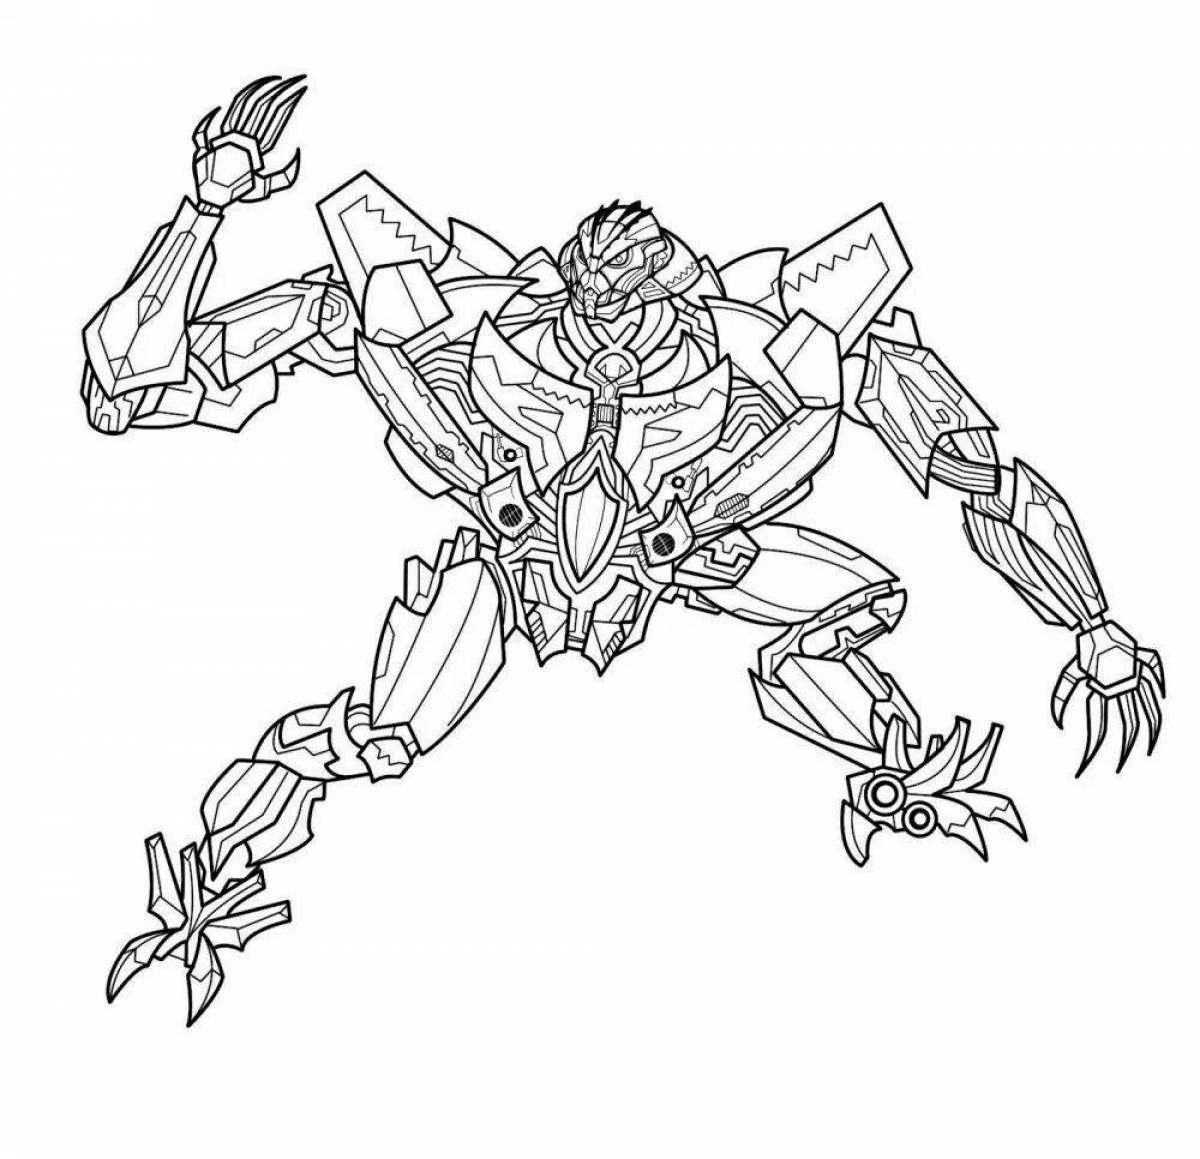 Decepticons glamorous coloring page